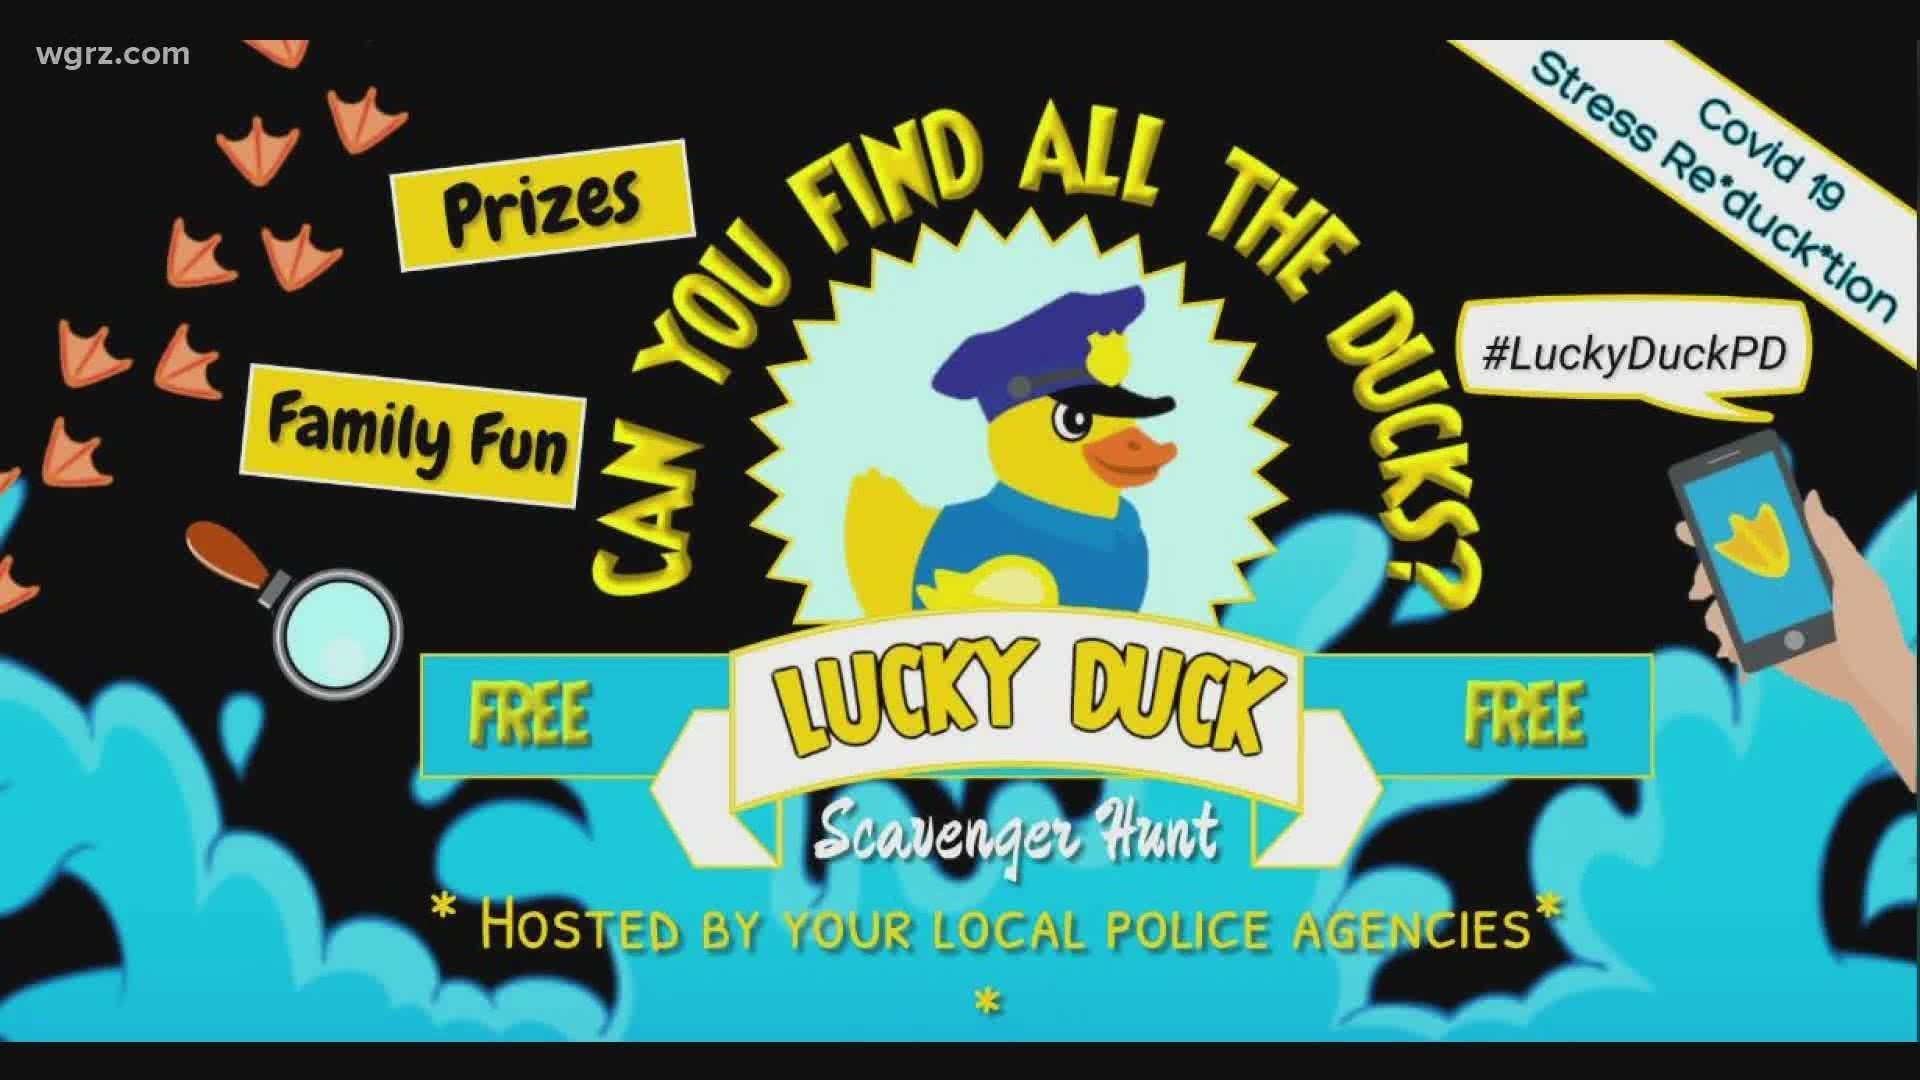 Area police agencies are hosting a rubber ducky scavenger hunt, and they encourage families to be on the lookout for the toys throughout the month of August.